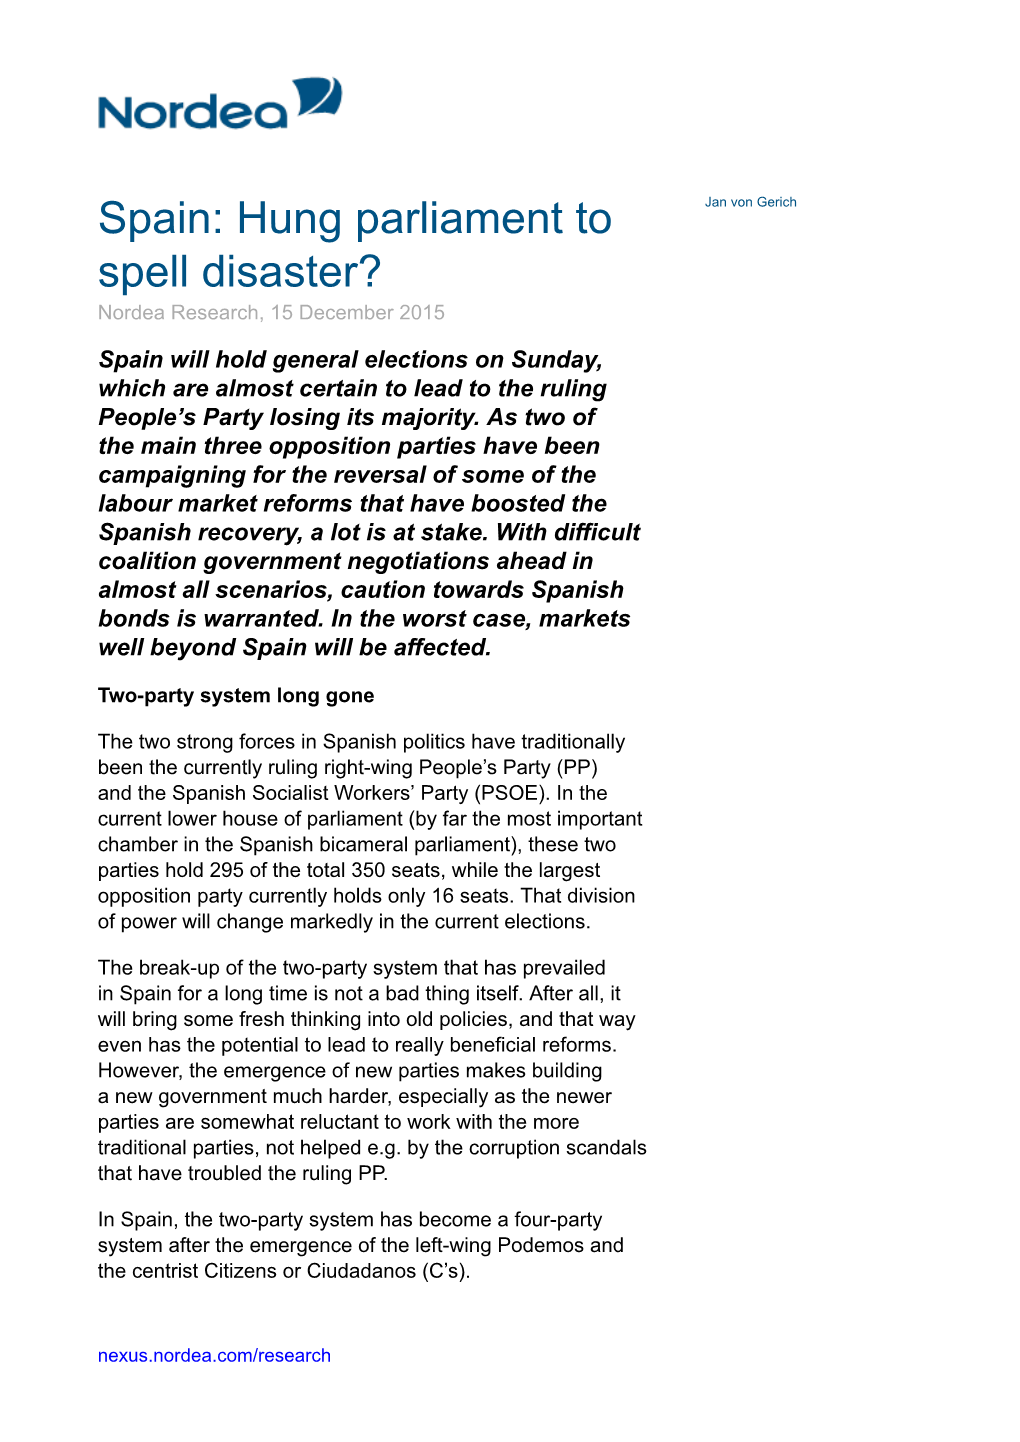 Spain: Hung Parliament to Spell Disaster? Nordea Research, 15 December 2015